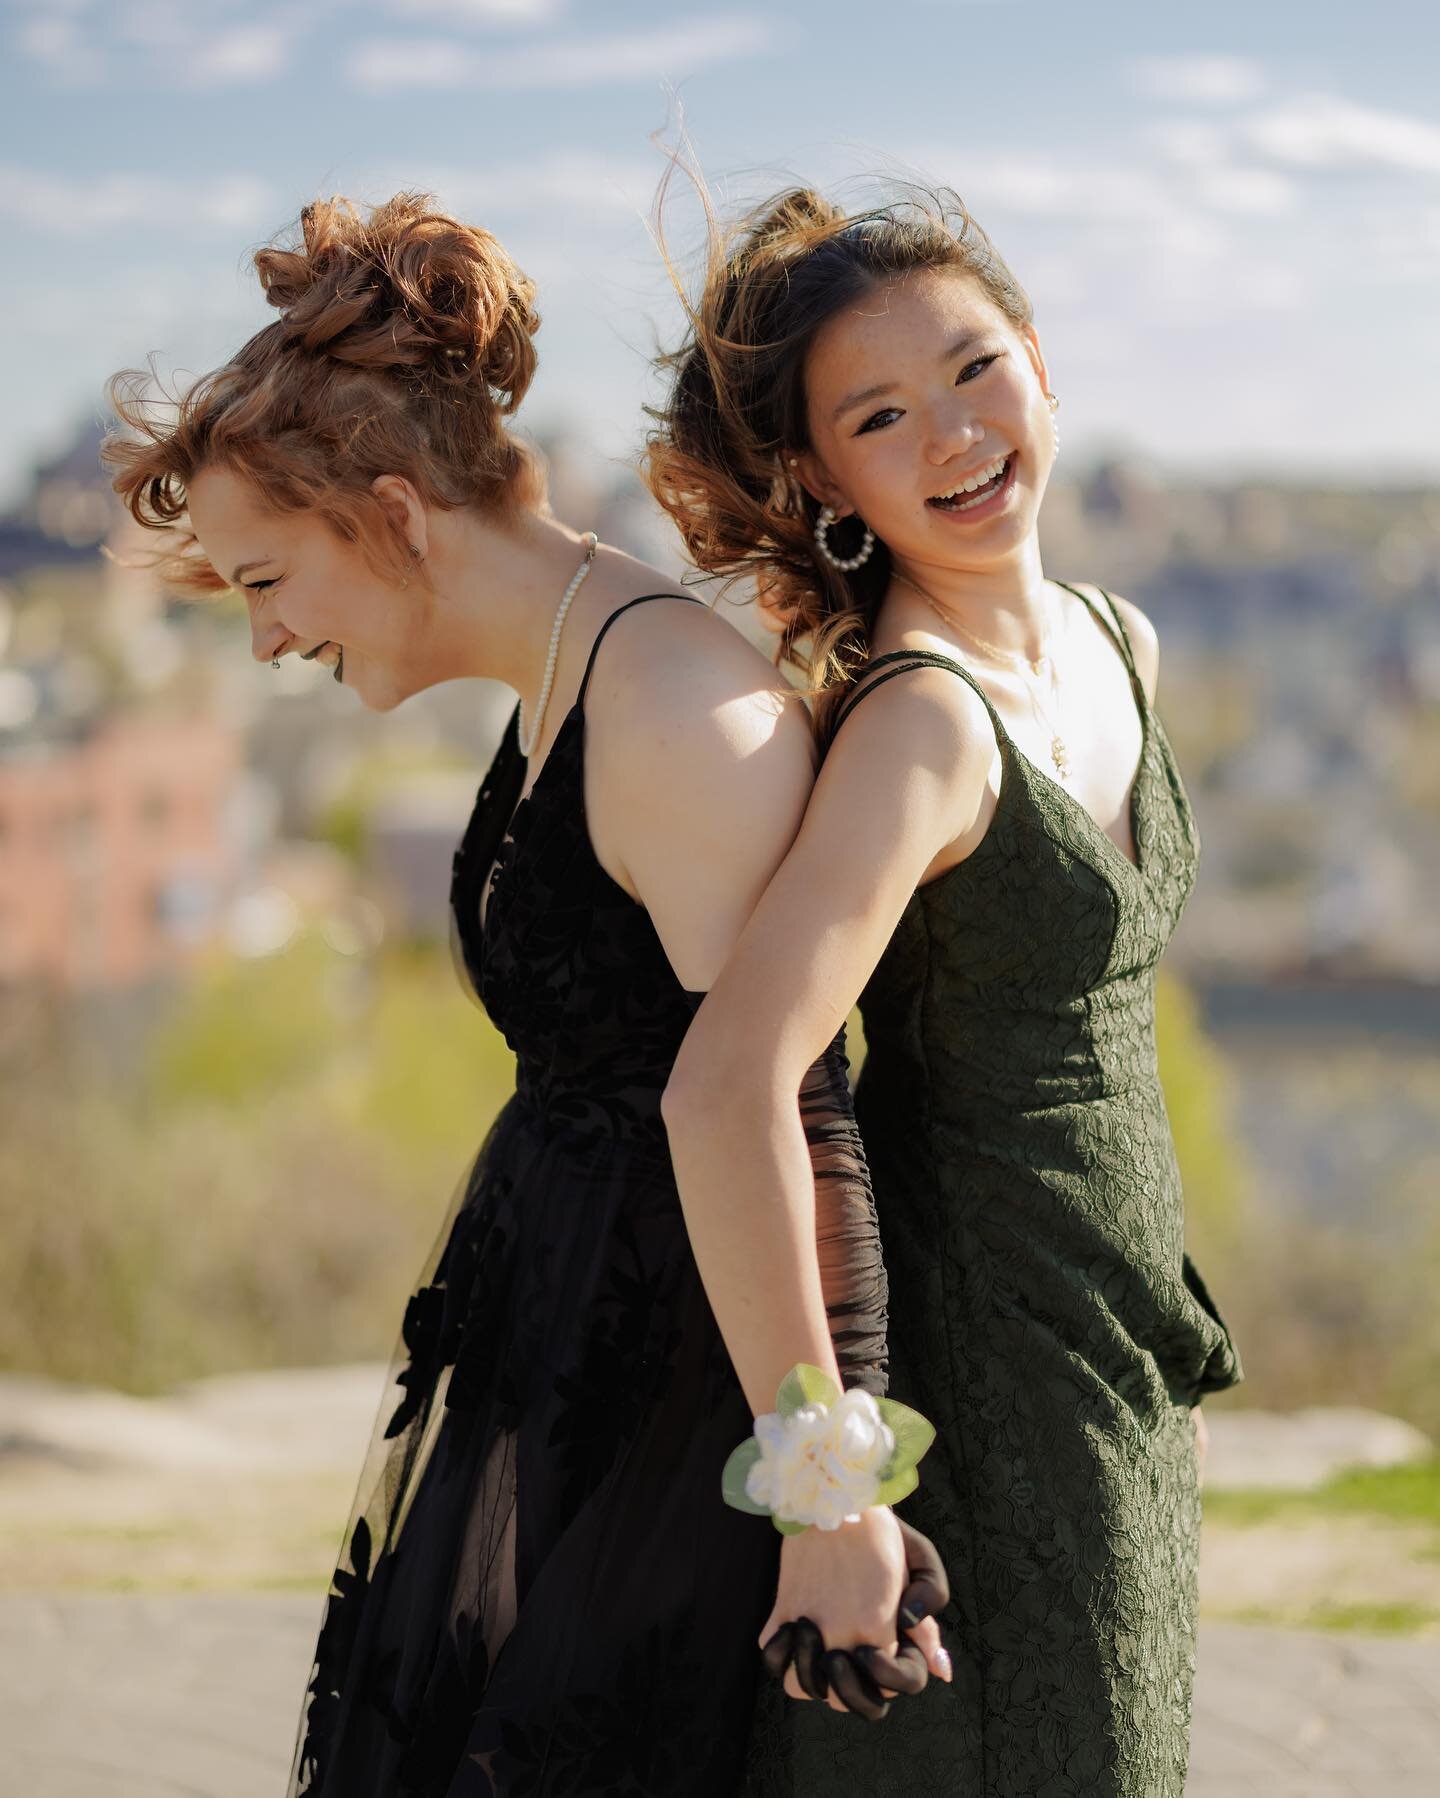 Really fun to do a before prom shoot on the East End! @kirakeniston asked me to snap a few pics of her and her sister Emily, wonderful ladies!